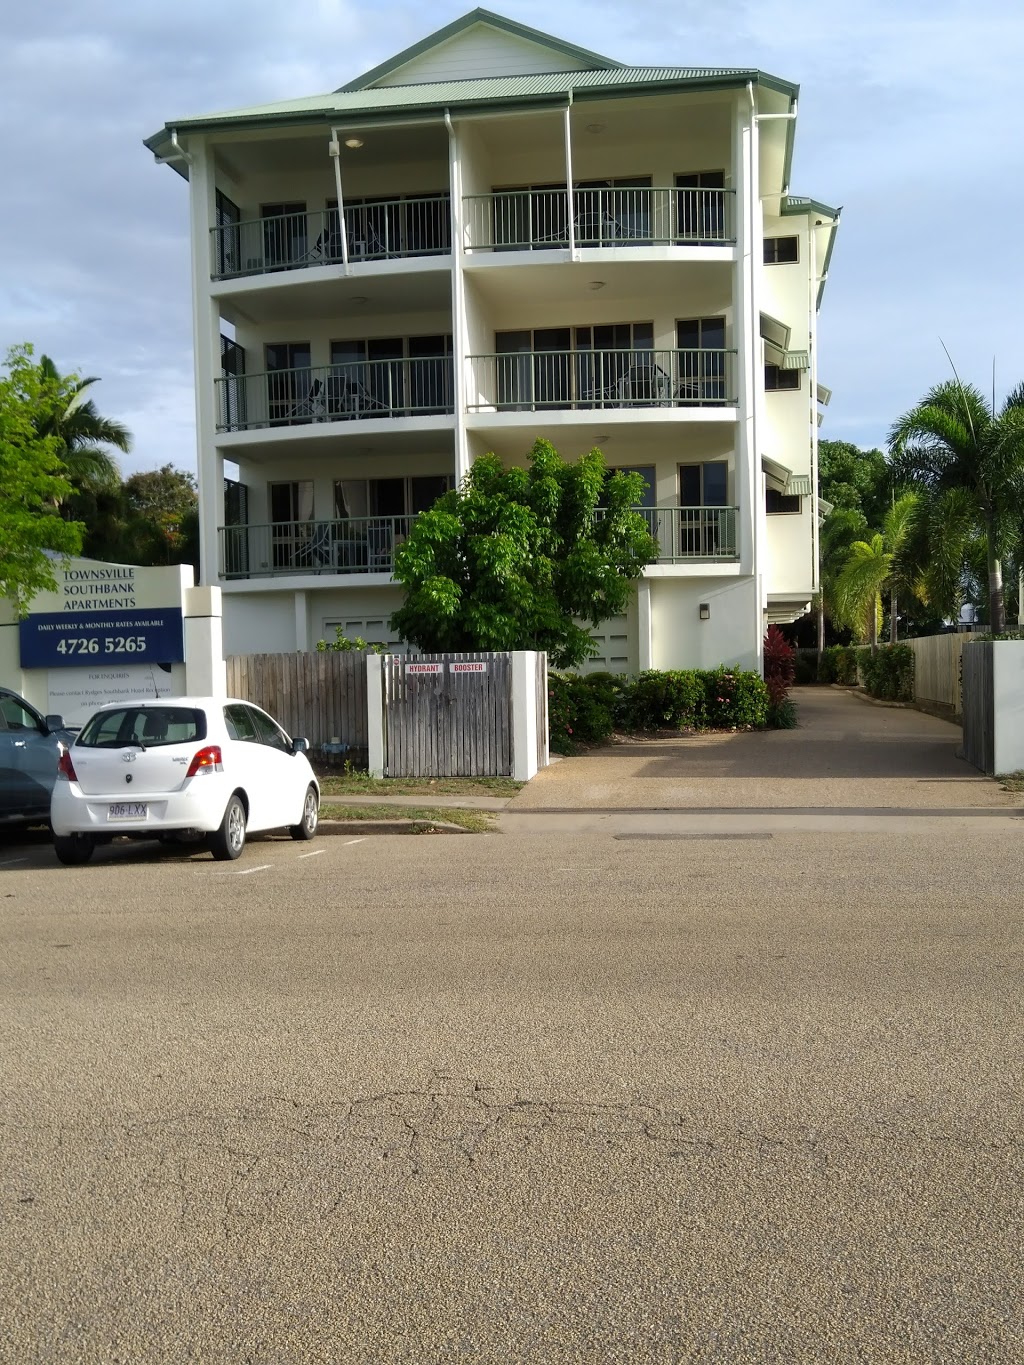 Townsville Southbank Apartments | lodging | 19 Mcilwraith St, South Townsville QLD 4810, Australia | 0747265265 OR +61 7 4726 5265